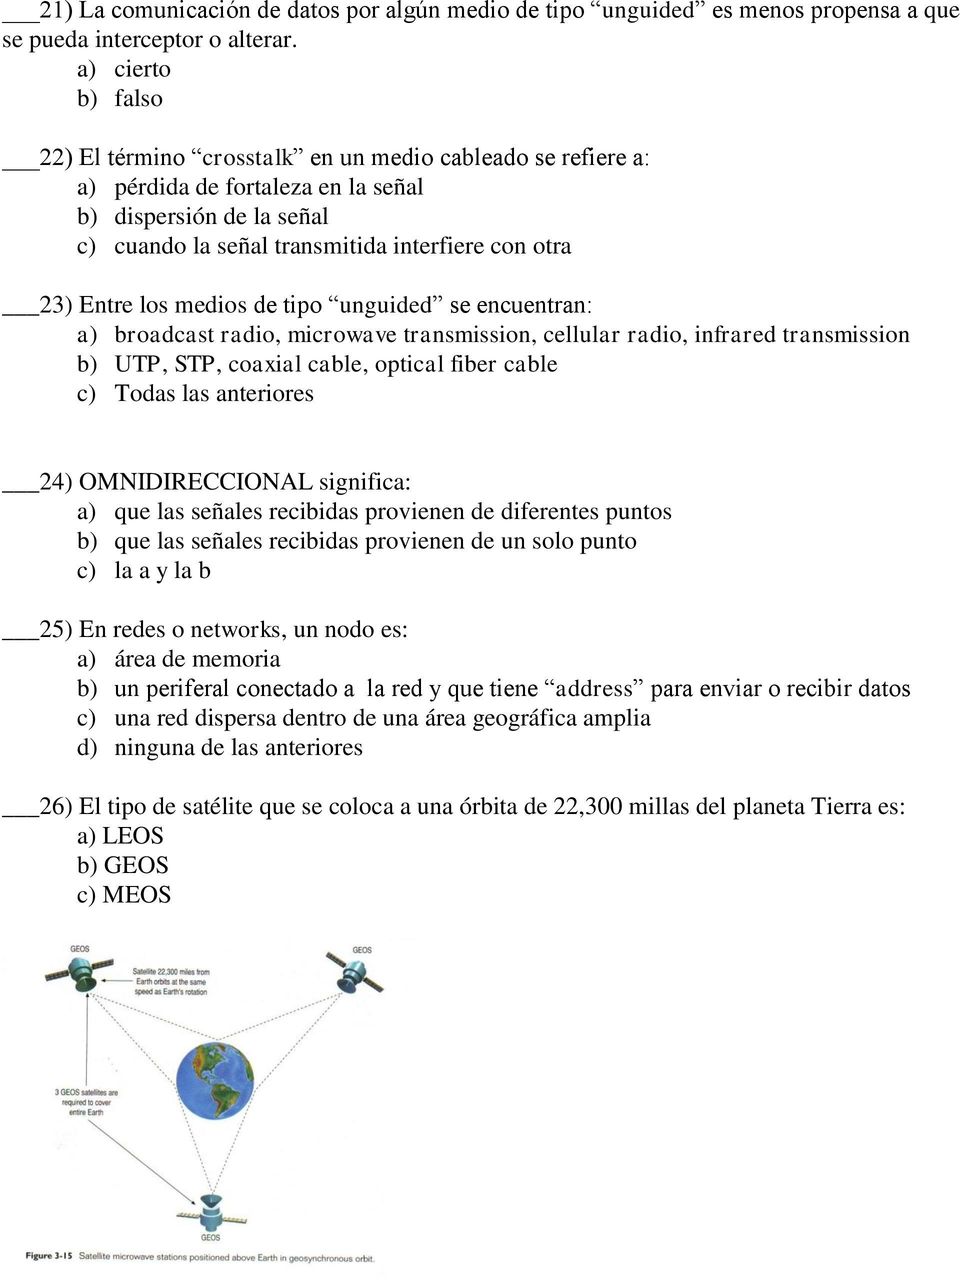 tipo unguided se encuentran: a) broadcast radio, microwave transmission, cellular radio, infrared transmission b) UTP, STP, coaxial cable, optical fiber cable c) Todas las anteriores 24)